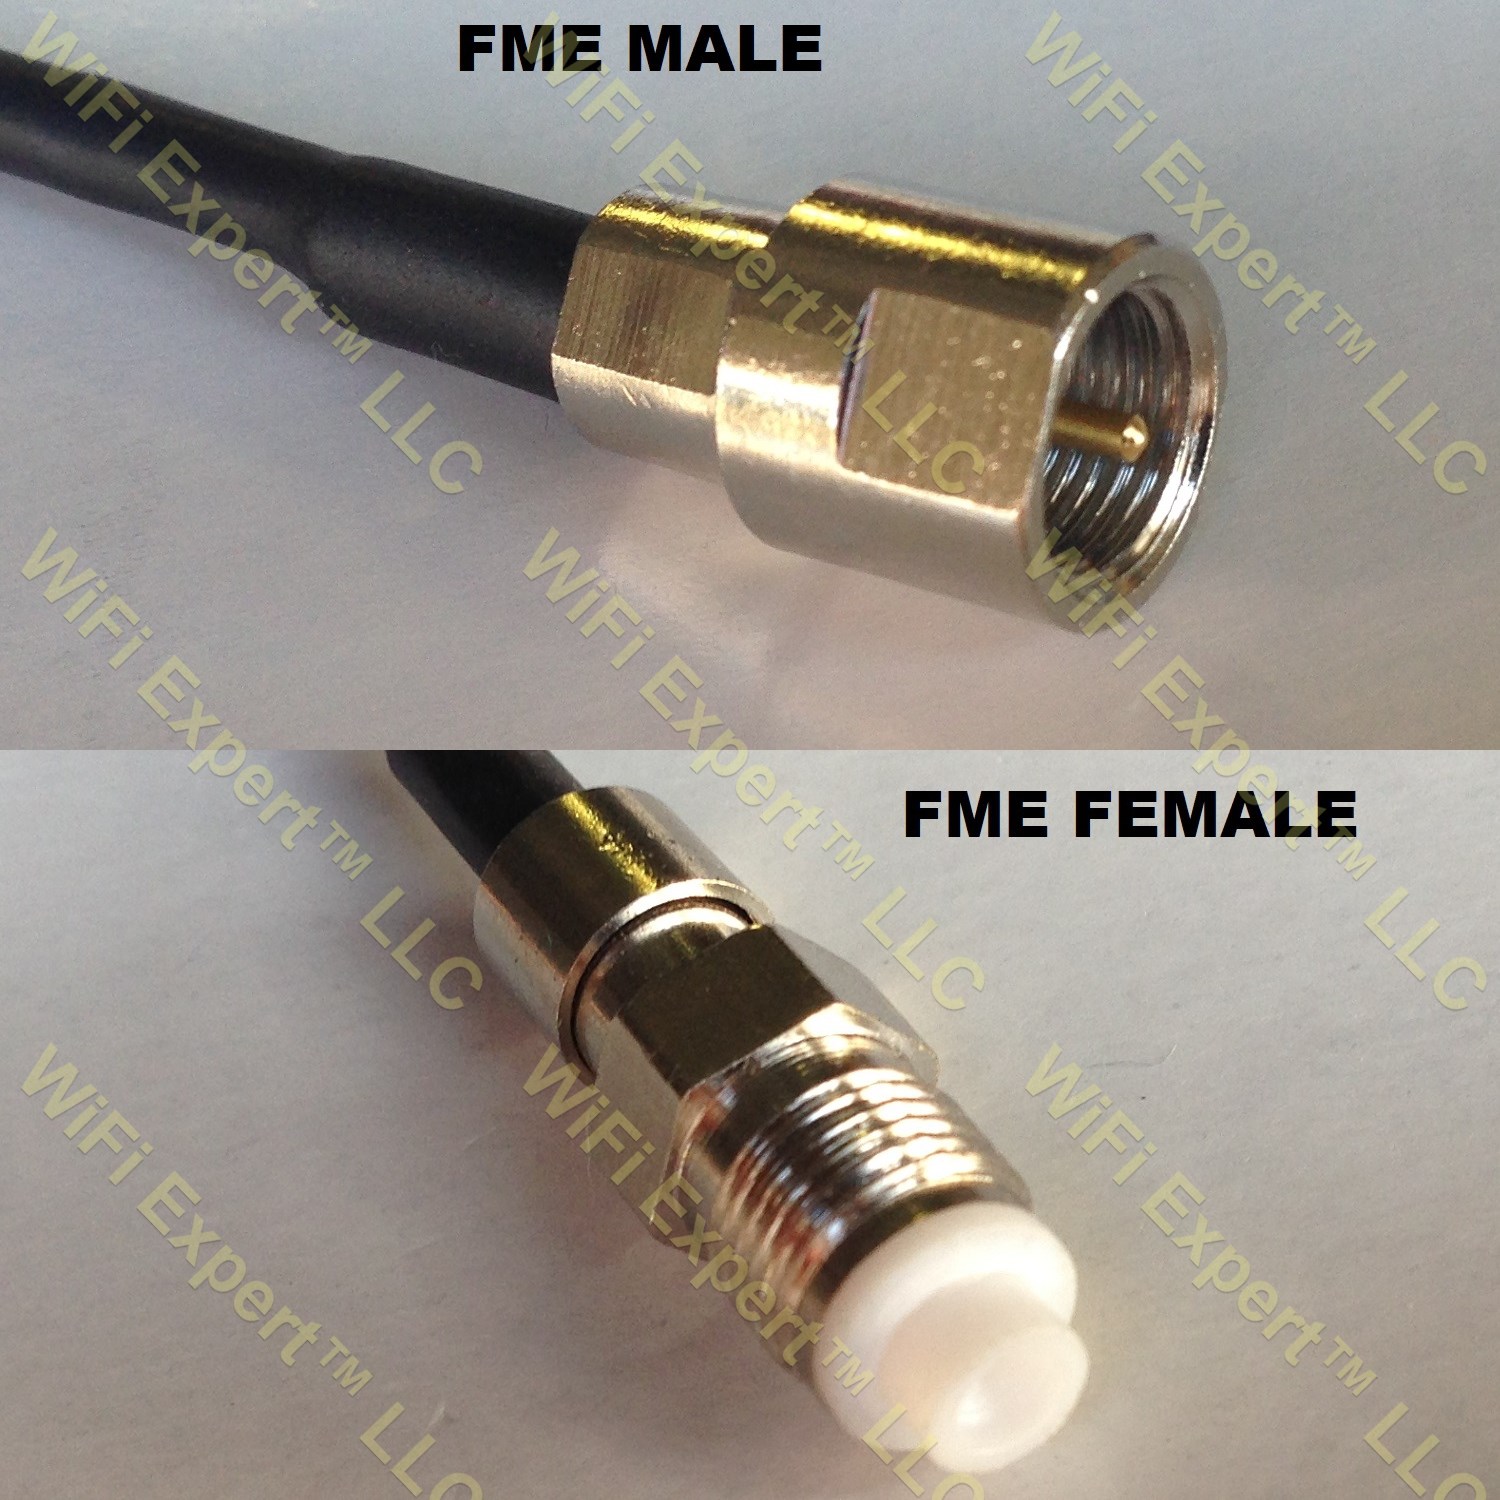 1 feet RG316 FME Male to FME Female RF Pigtail Coaxial Cable